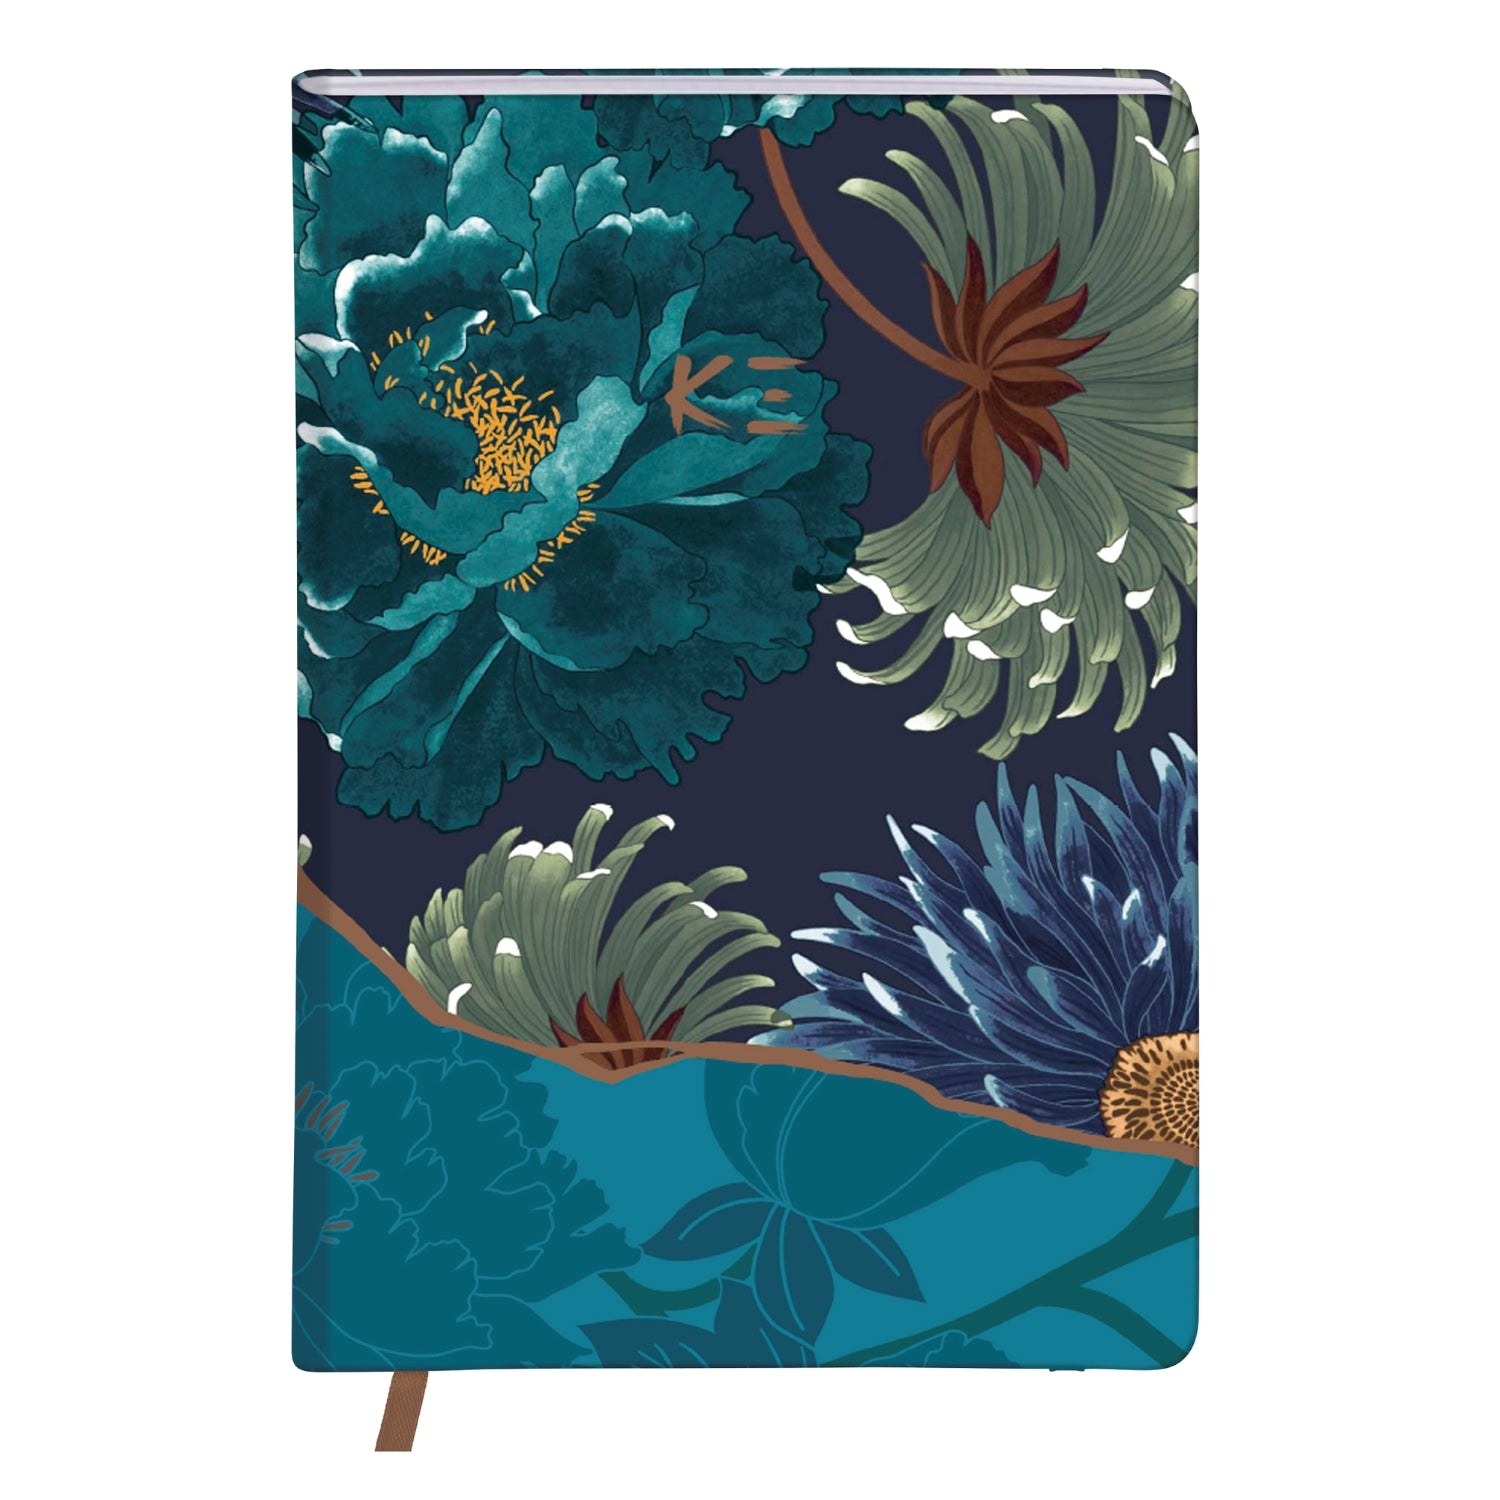 Clairefontaine K3 Kenzo Takada Notebook A5 Lined - Blue